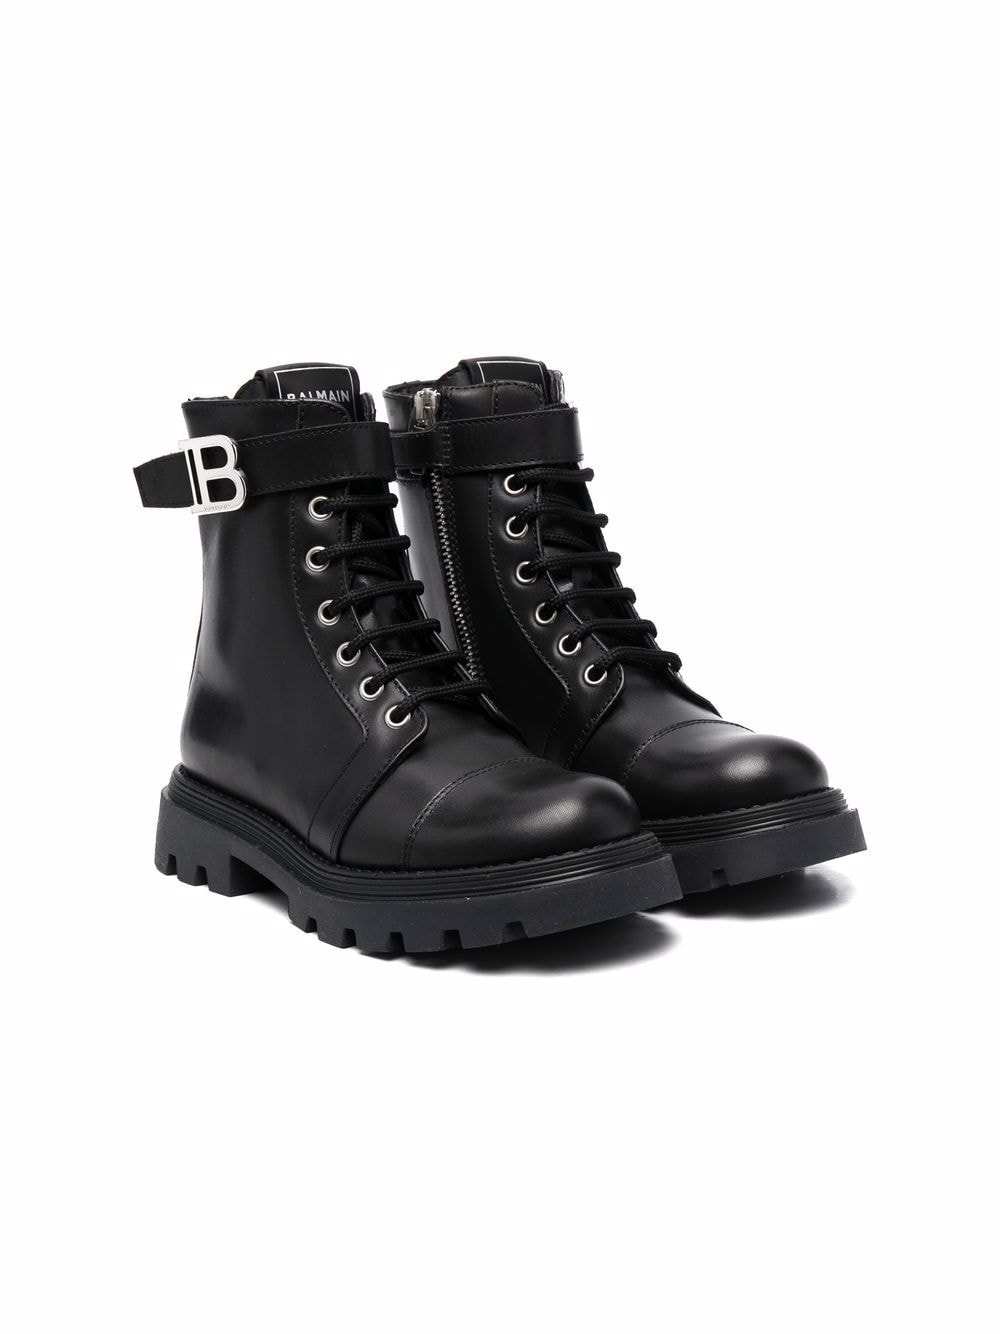 Footwear Flashback: Balmain's Buckled Combat Boots from FW14